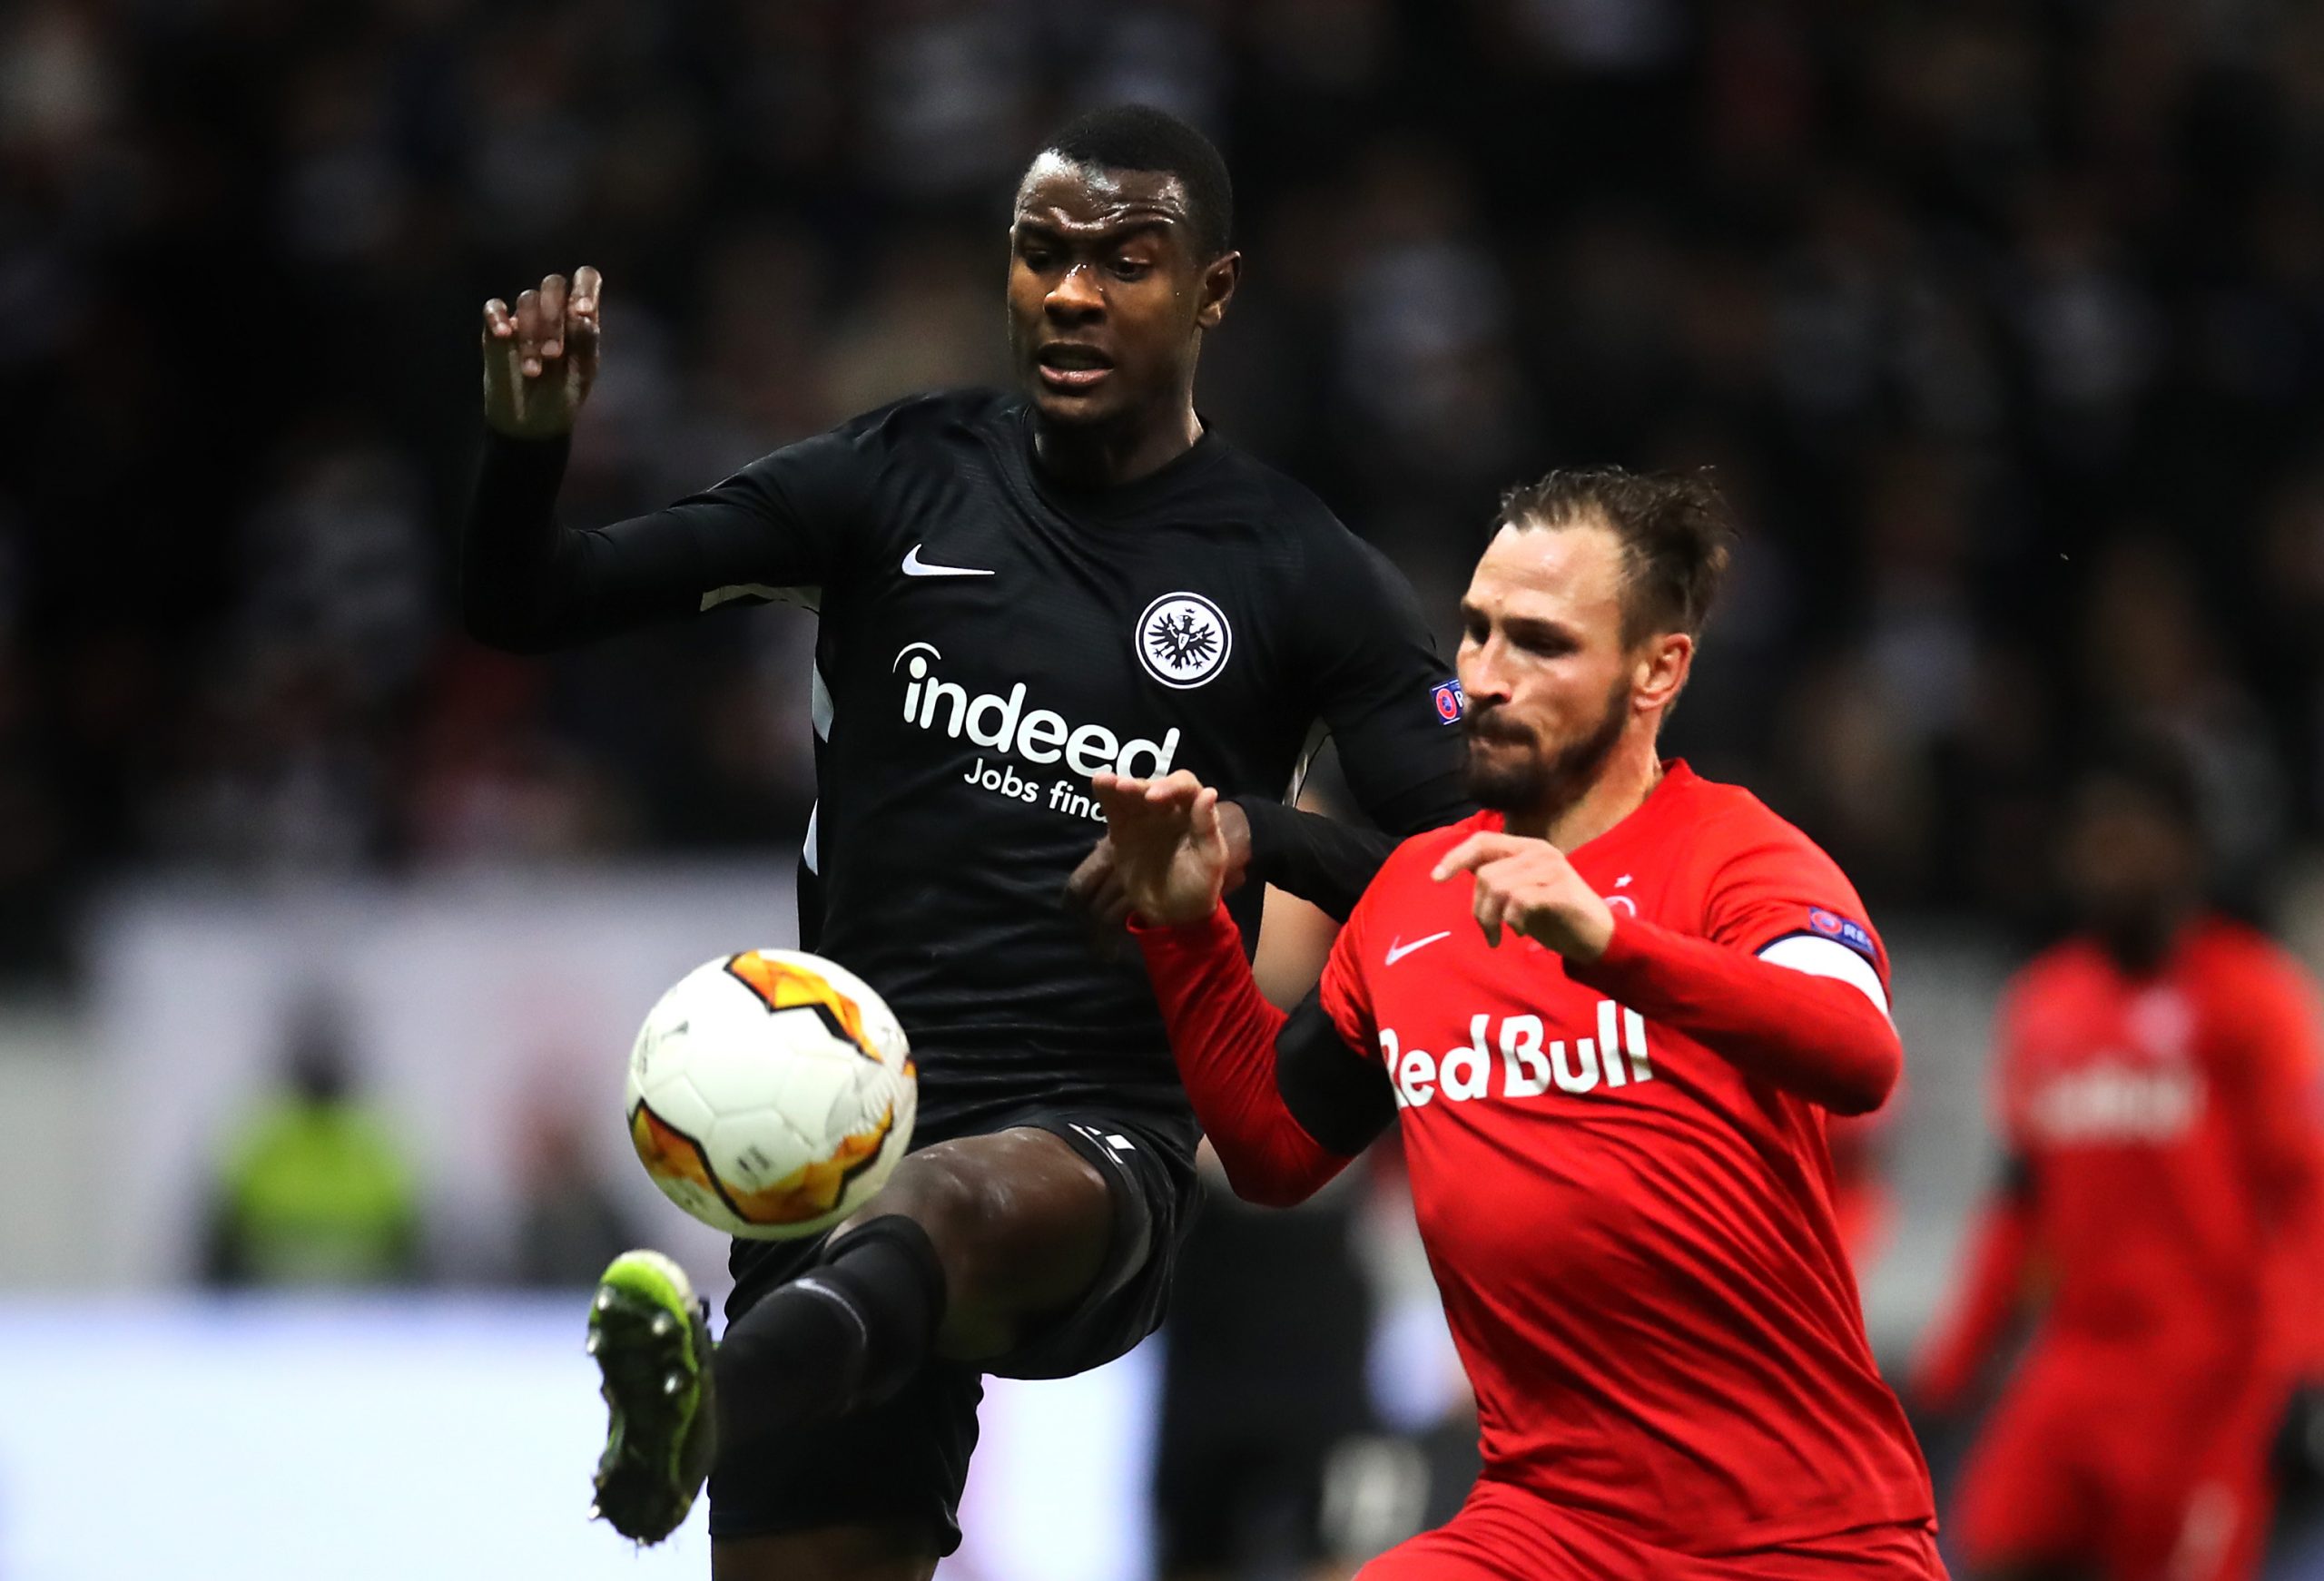 FRANKFURT AM MAIN, GERMANY - FEBRUARY 20: Evan N'Dicka of Eintracht Frankfurt controls the ball with pressure from Andreas Ulmer of RB Salzburg during the UEFA Europa League round of 32 first leg match between Eintracht Frankfurt and RB Salzburg at Commerzbank Arena on February 20, 2020, in Frankfurt am Main, Germany. (Photo by Alex Grimm/Bongarts/Getty Images)